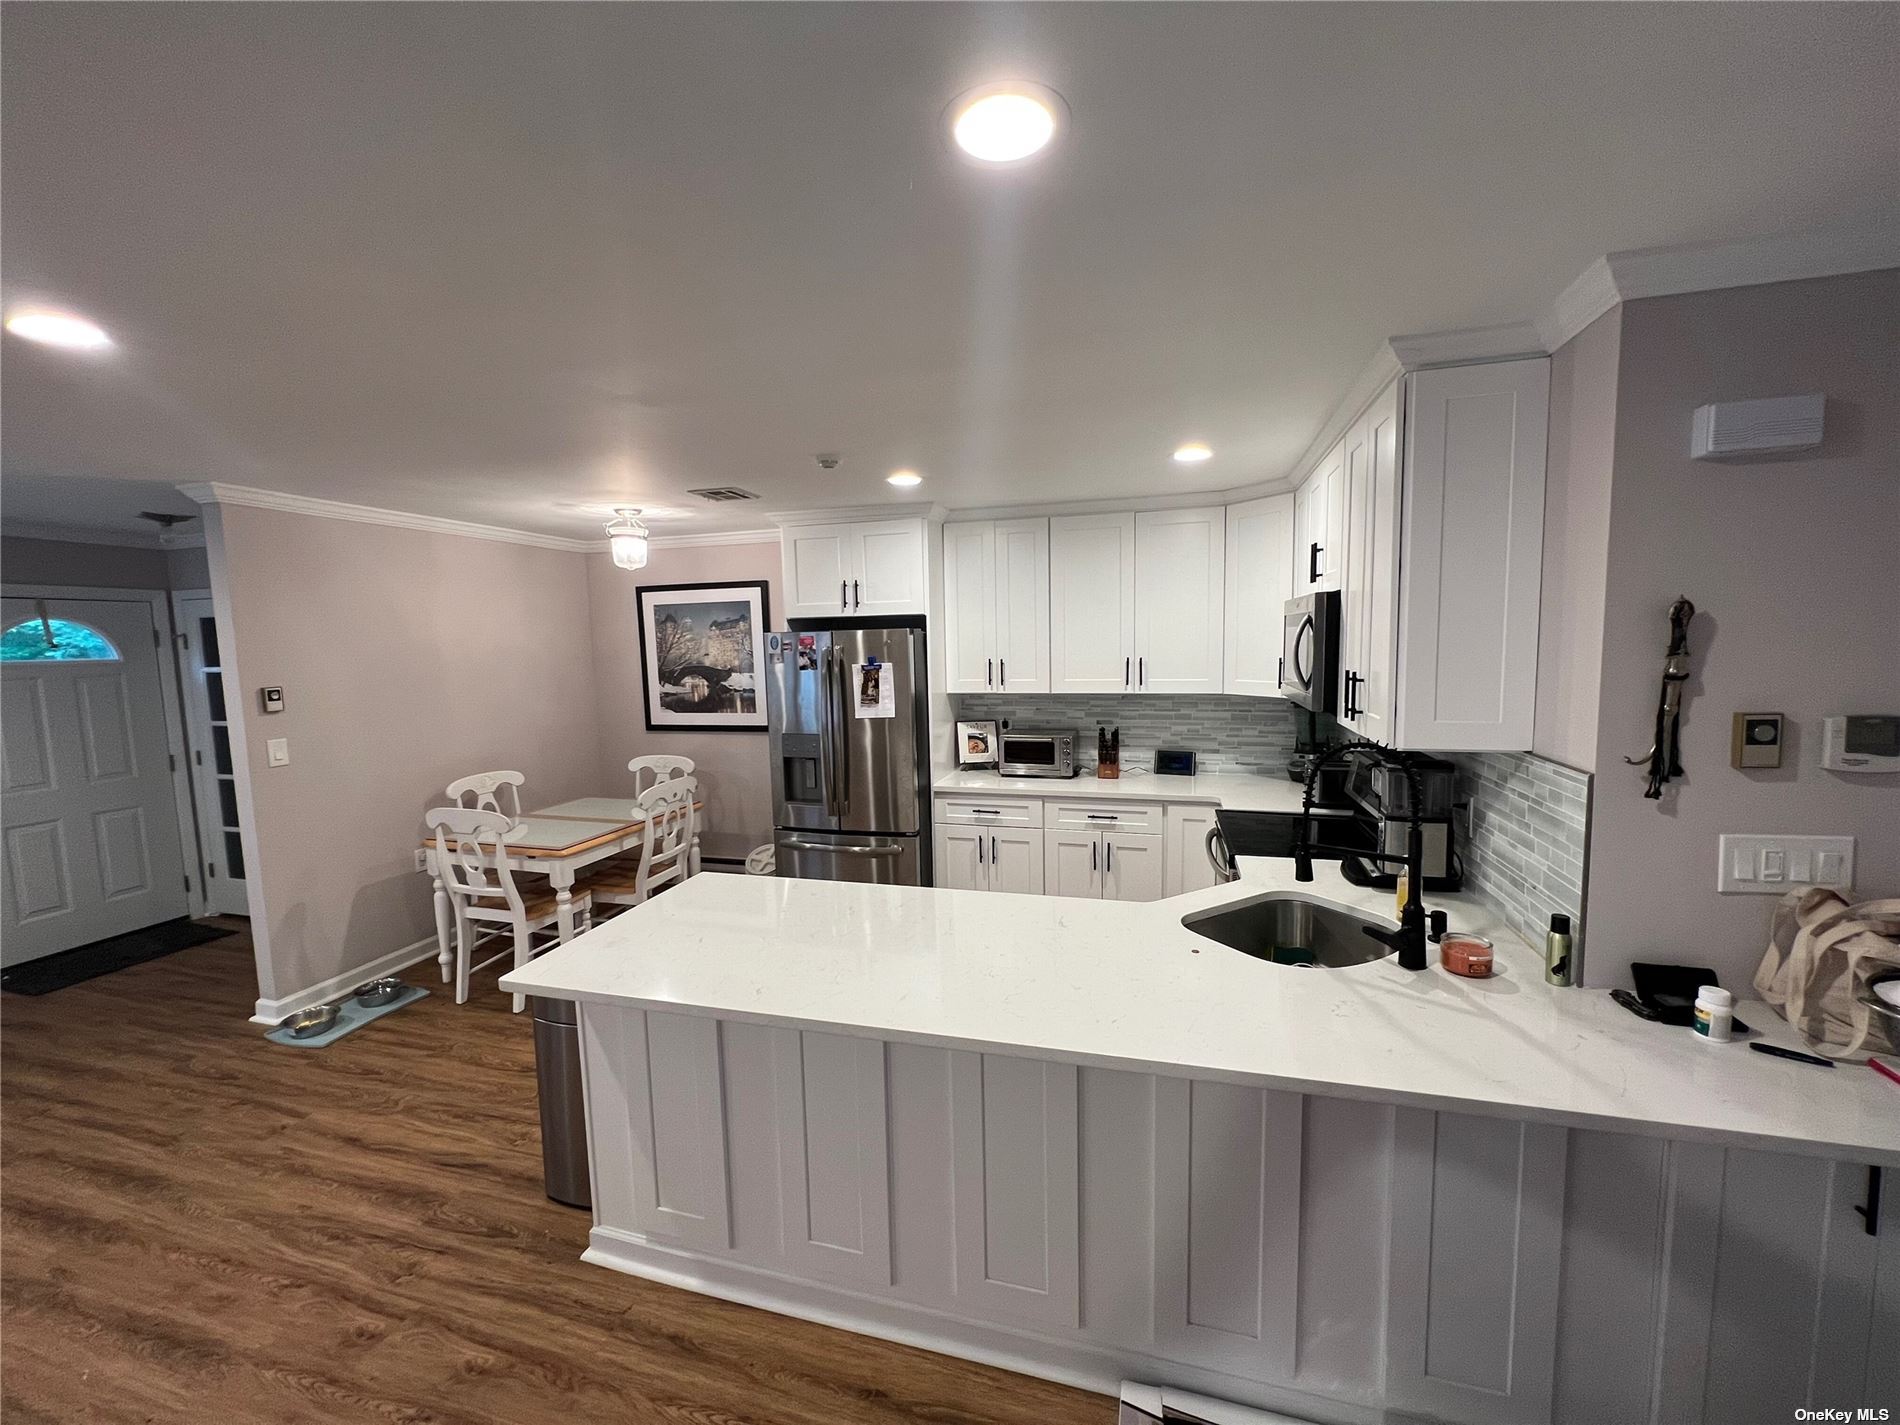 a room with stainless steel appliances kitchen island granite countertop a refrigerator and a sink